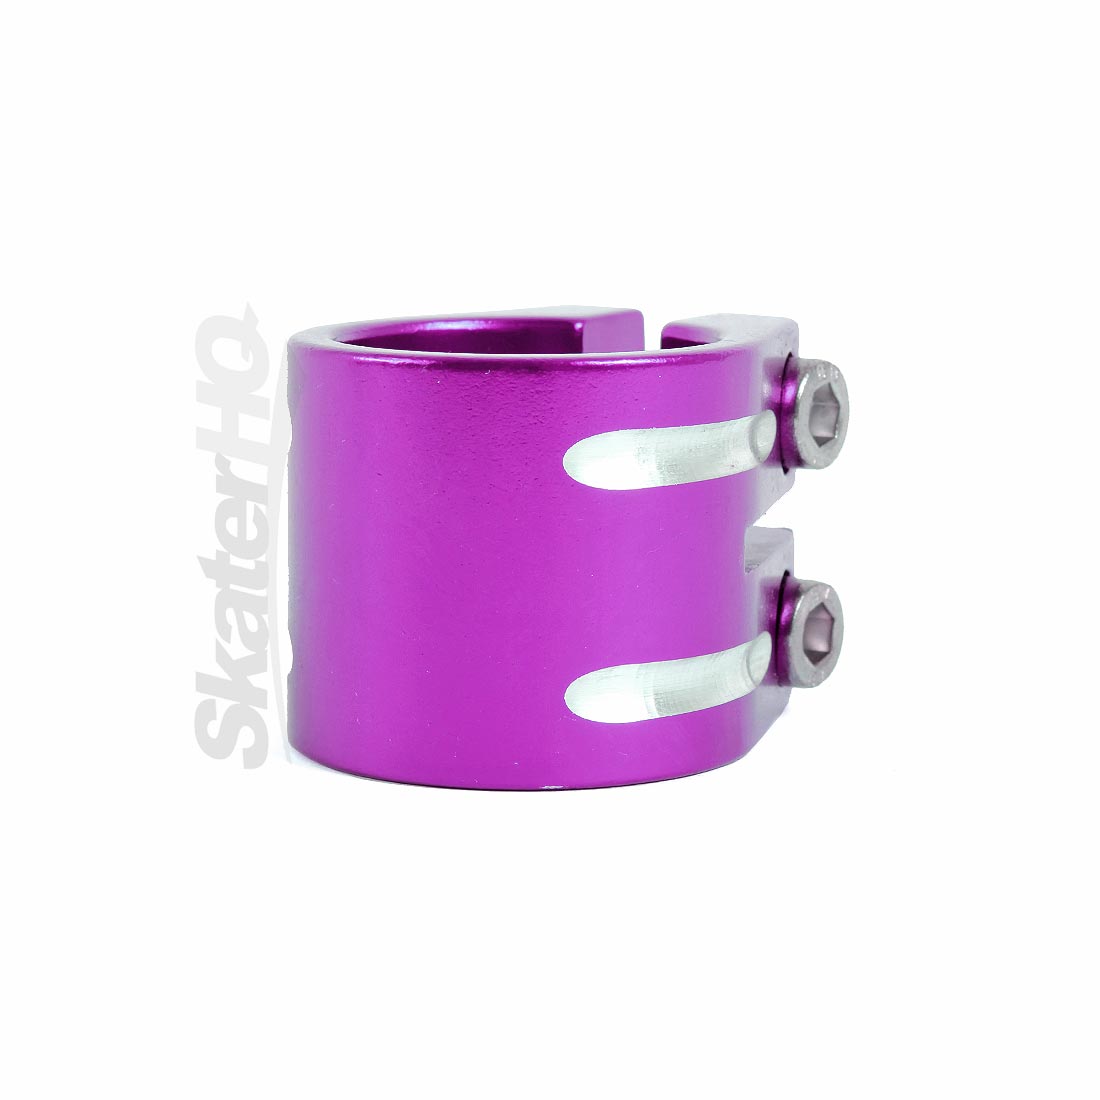 Flavor Double Clamp 31.8mm - Purple Scooter Headsets and Clamps